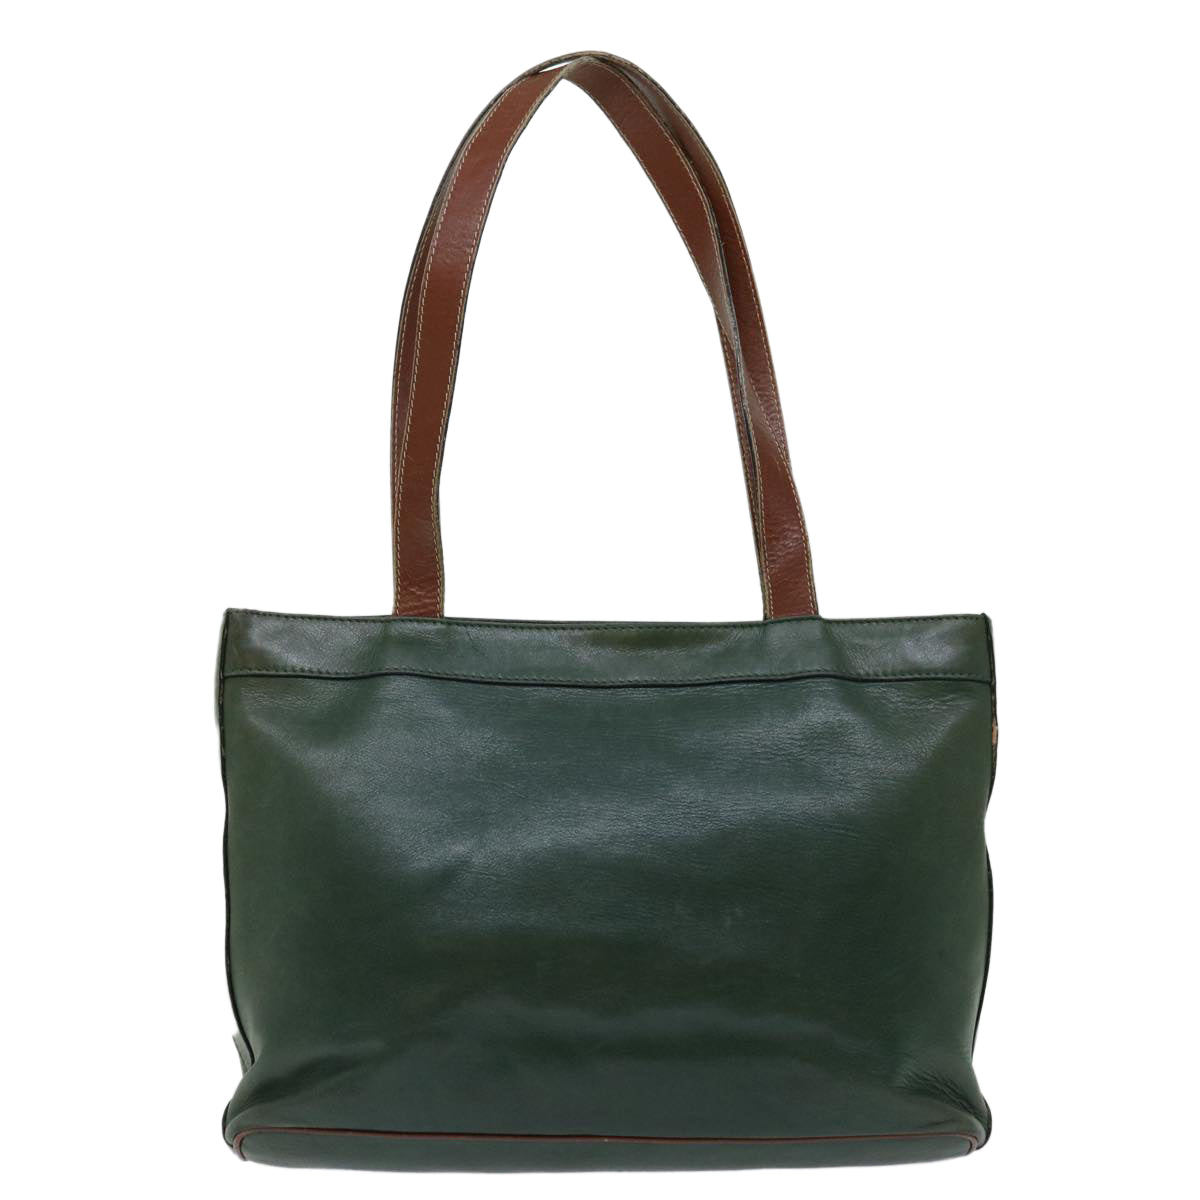 CELINE Tote Bag Leather Green Auth 68605 - 0